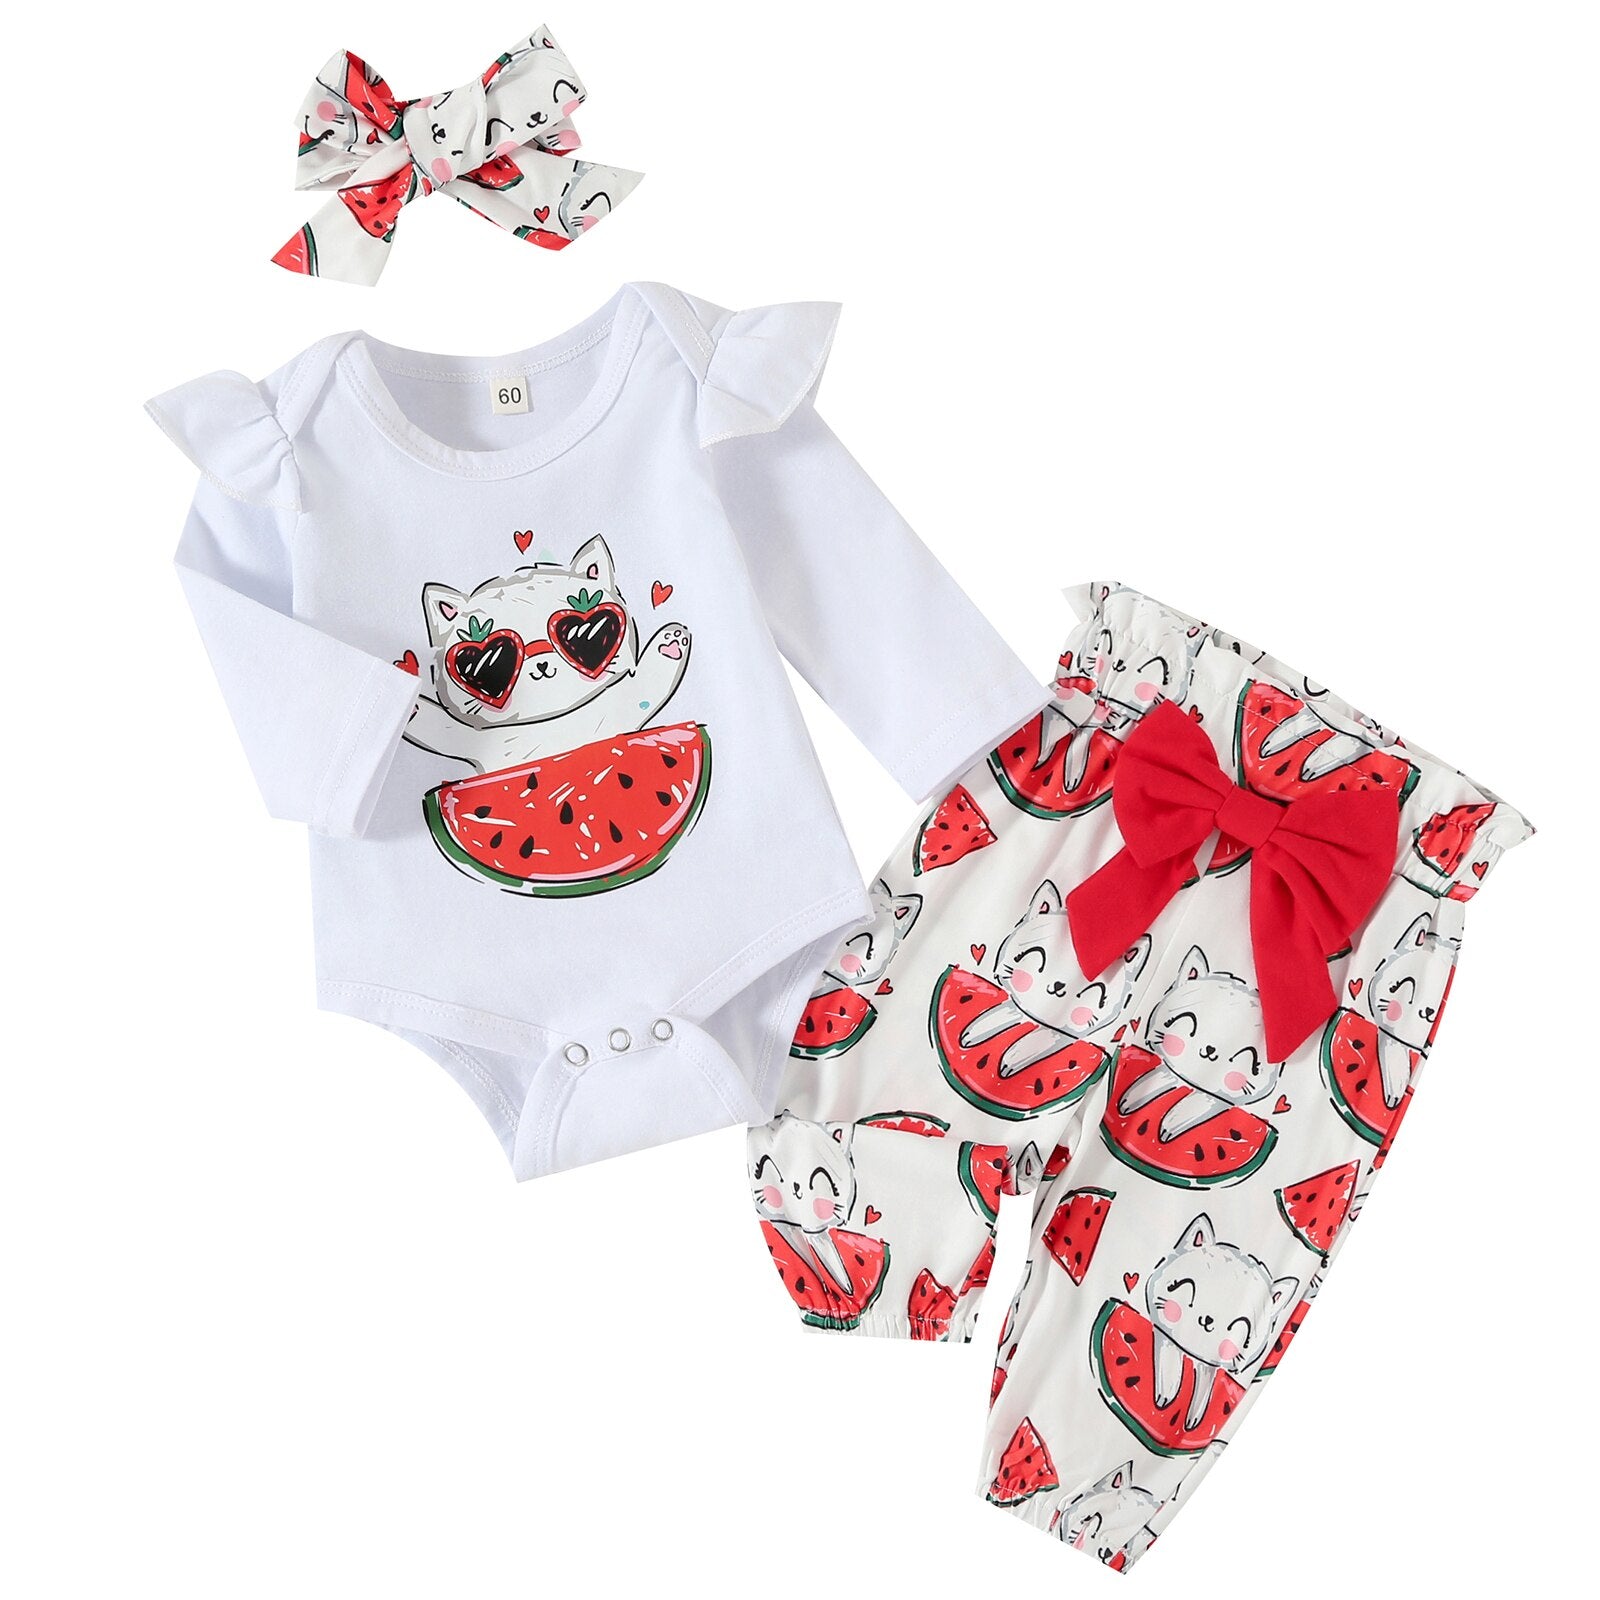 Adorable Newborn Baby Girl Clothing Sets with Insect Print and Ruffles